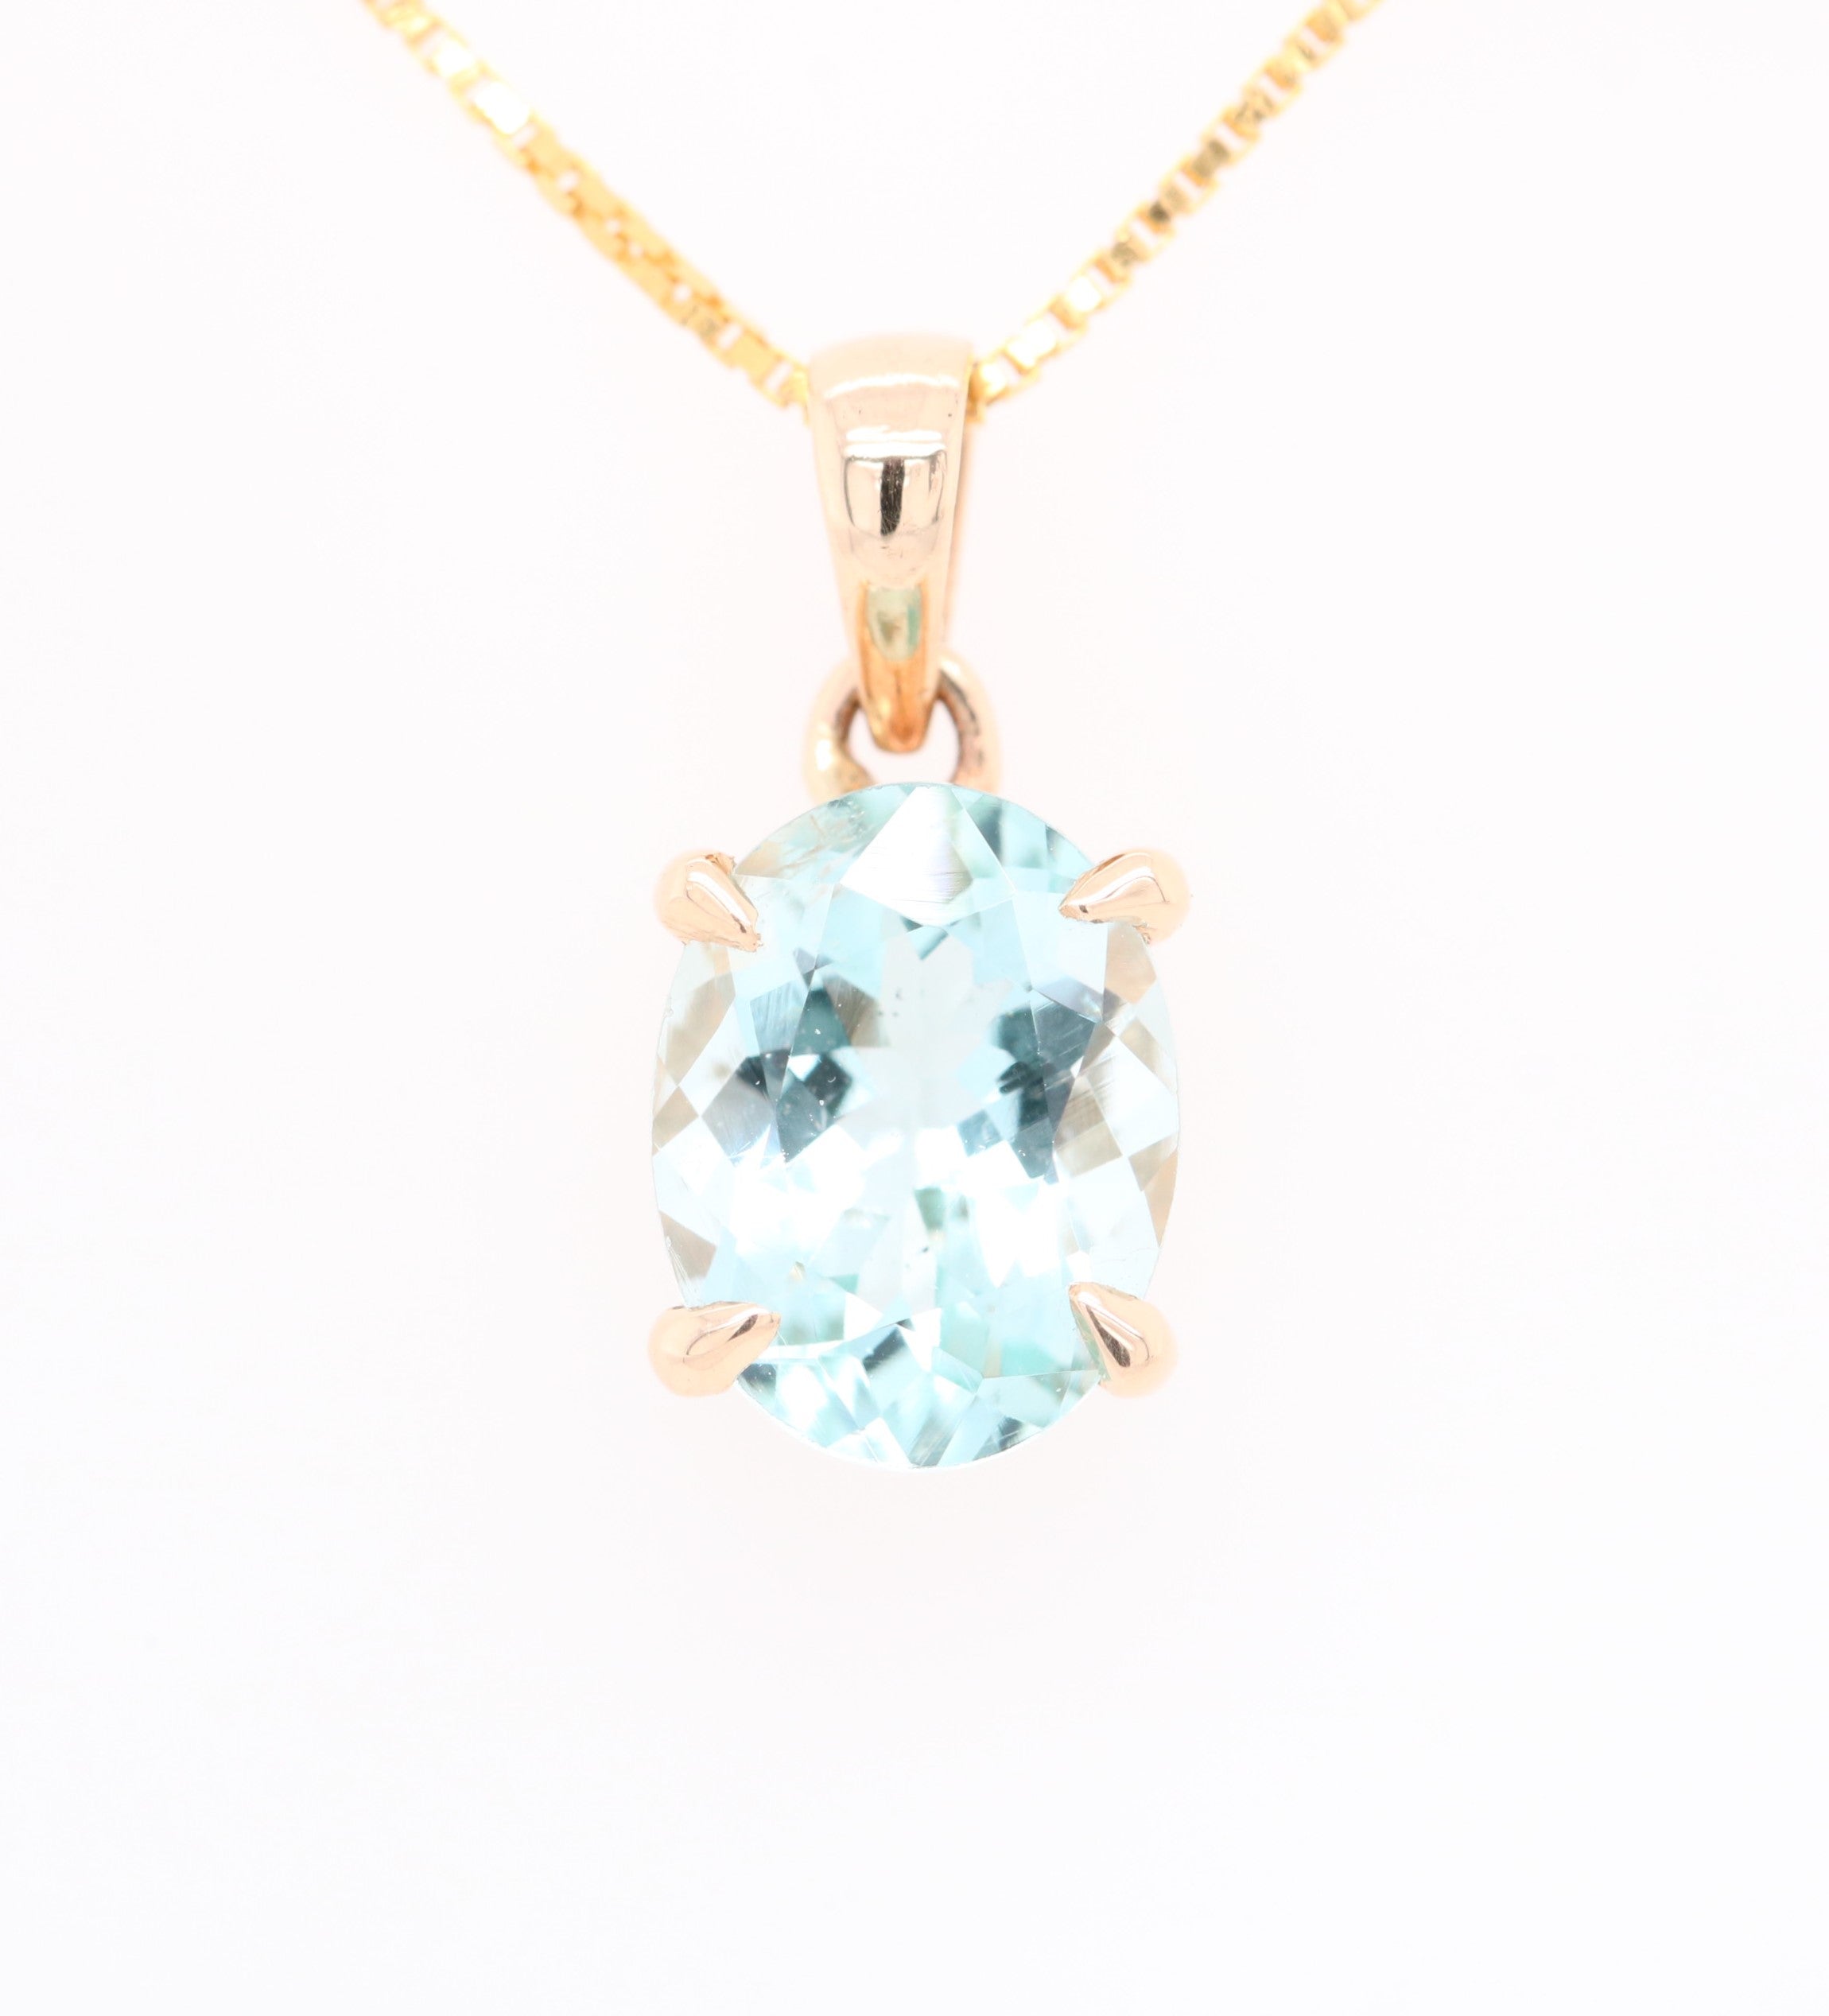 Green Aquamarine Oval Stone Pendant with 18K Yellow Gold Chain Necklace For Women